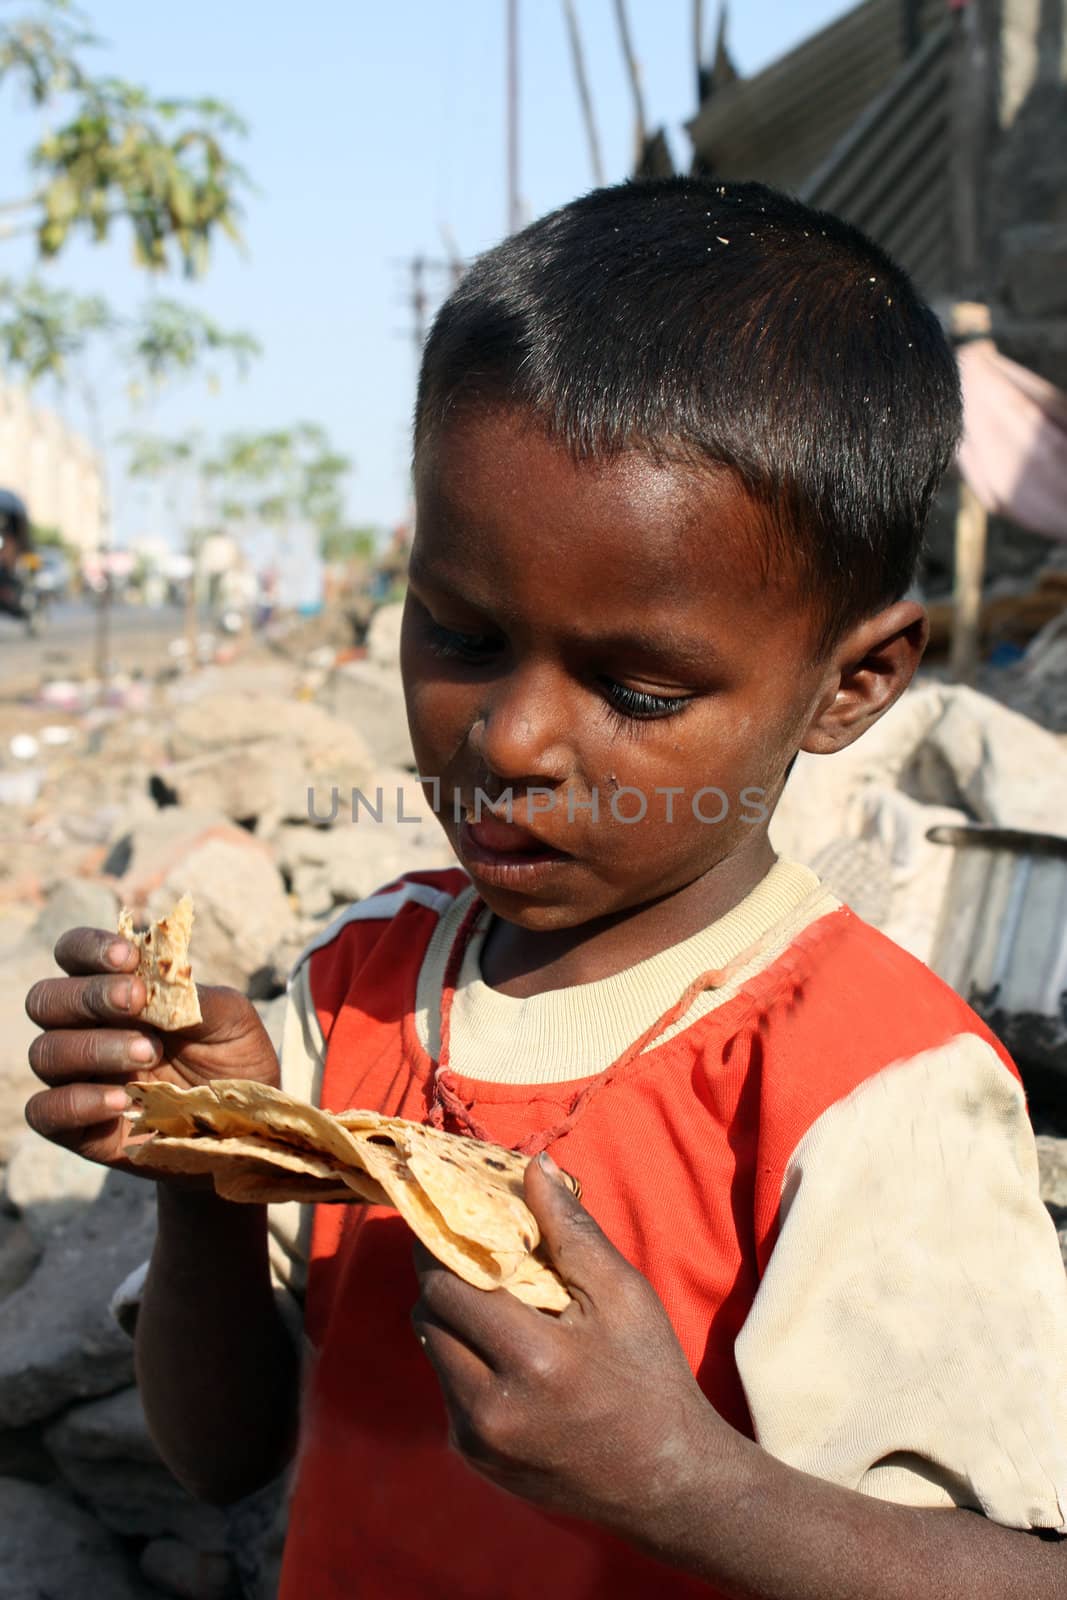 Eating Food in Poverty by thefinalmiracle